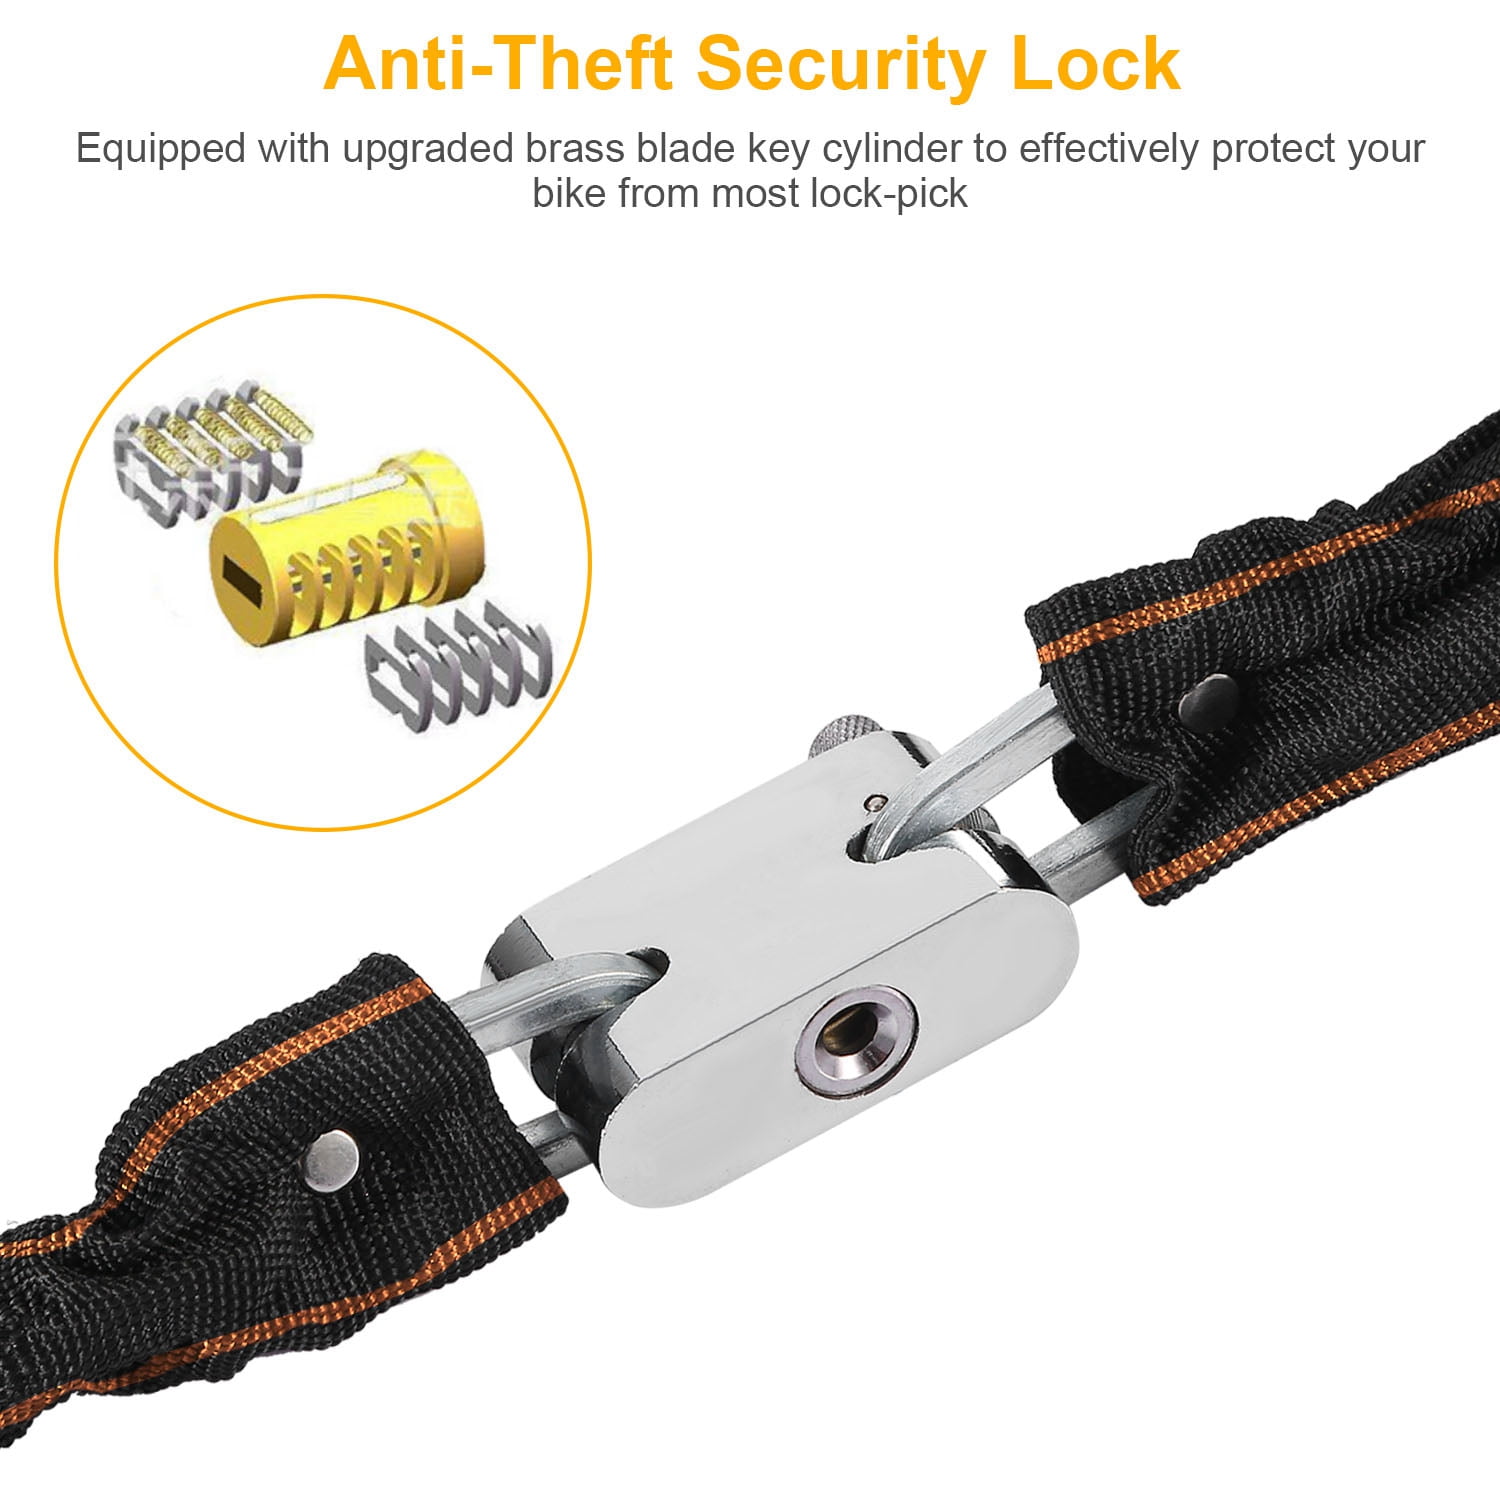 Heavy Duty Chain Lock,Security Chain Hardened 8mm Thick with Weather-Resistant Keyed Padlock, Perfect for Indoor Outdoor Motorcycles, Bikes